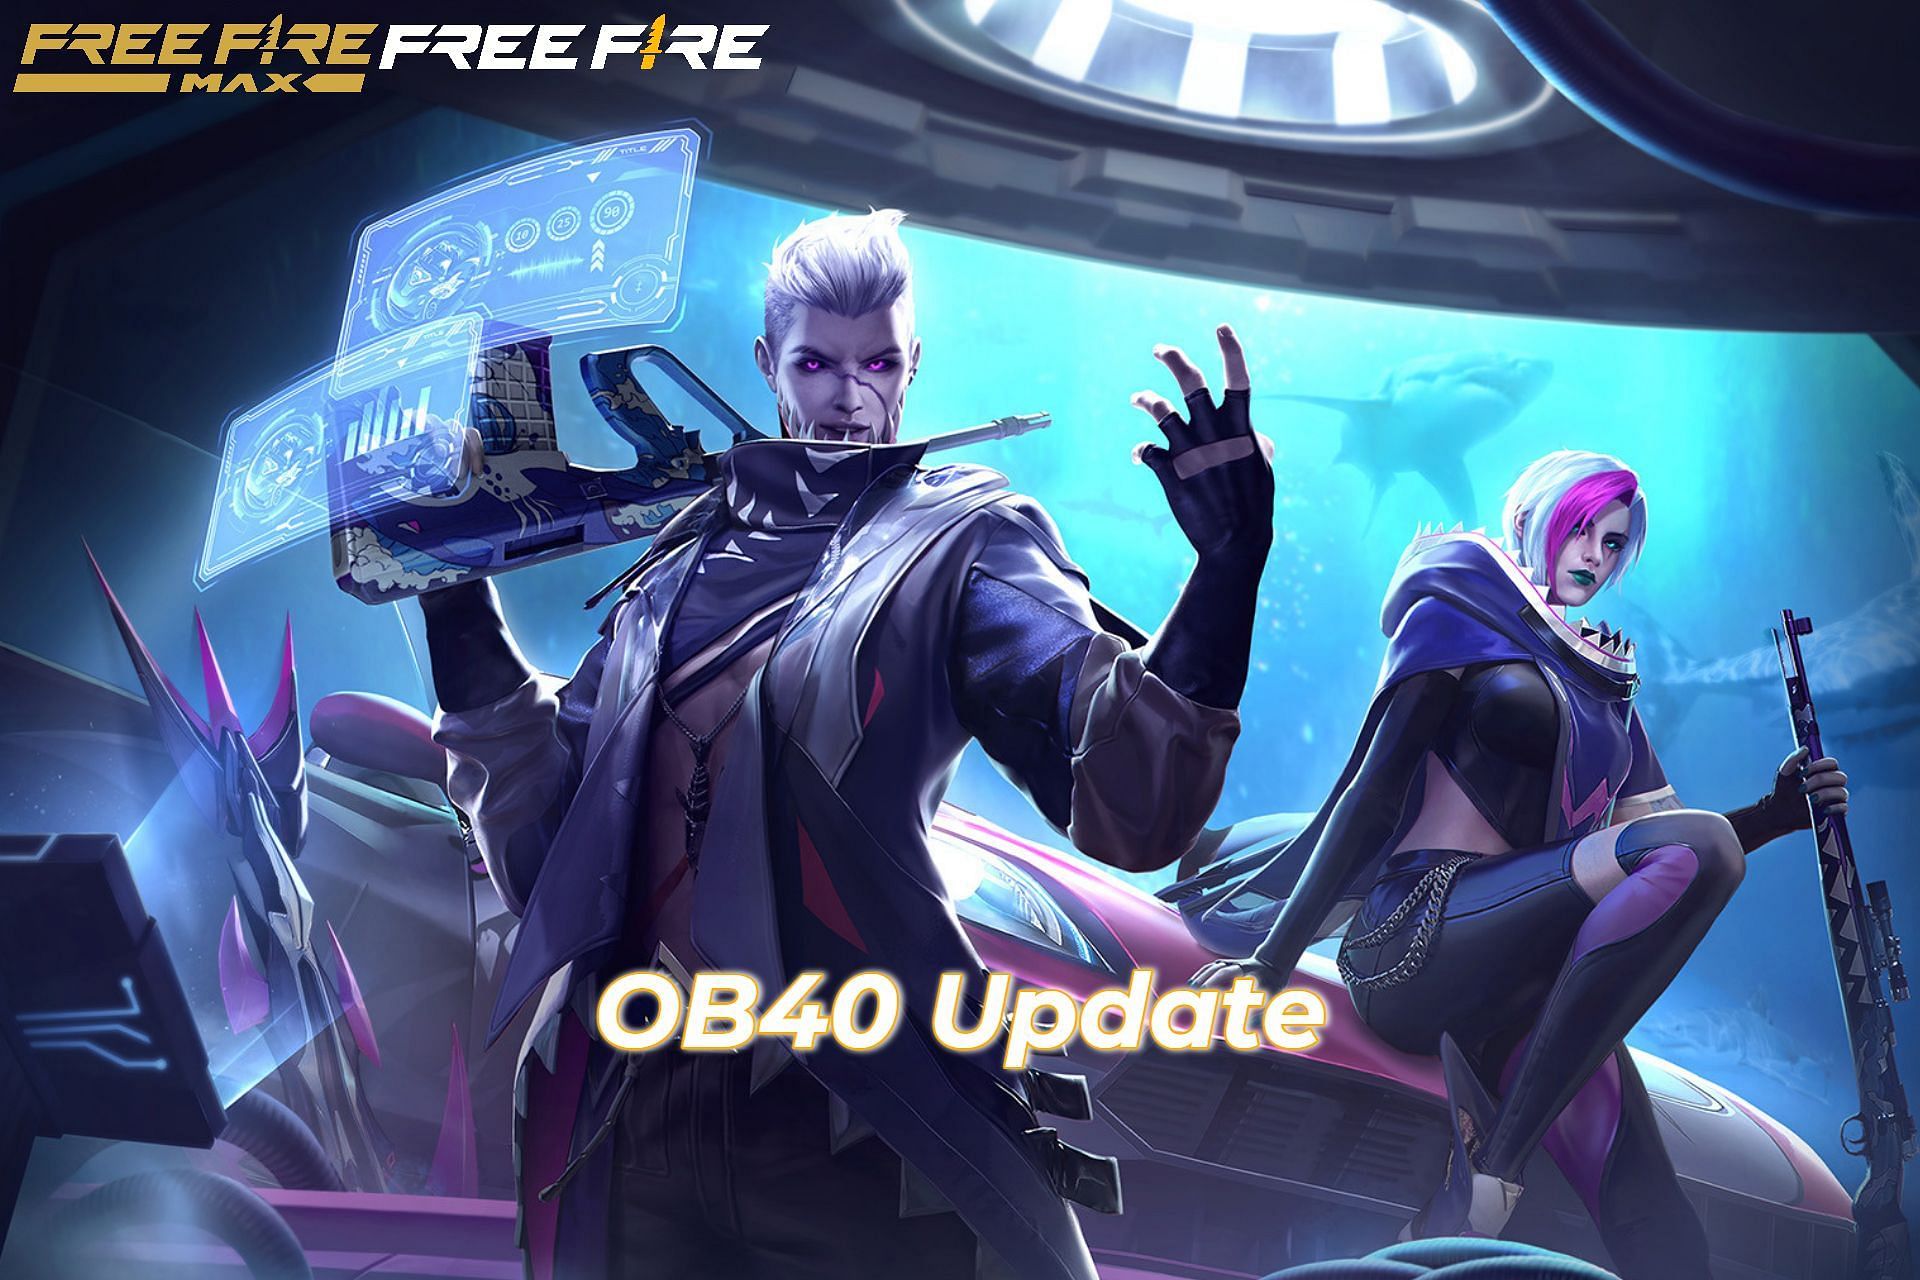 Free Fire Live Duo to Duo Game With 46 Player - Garena Free Fire